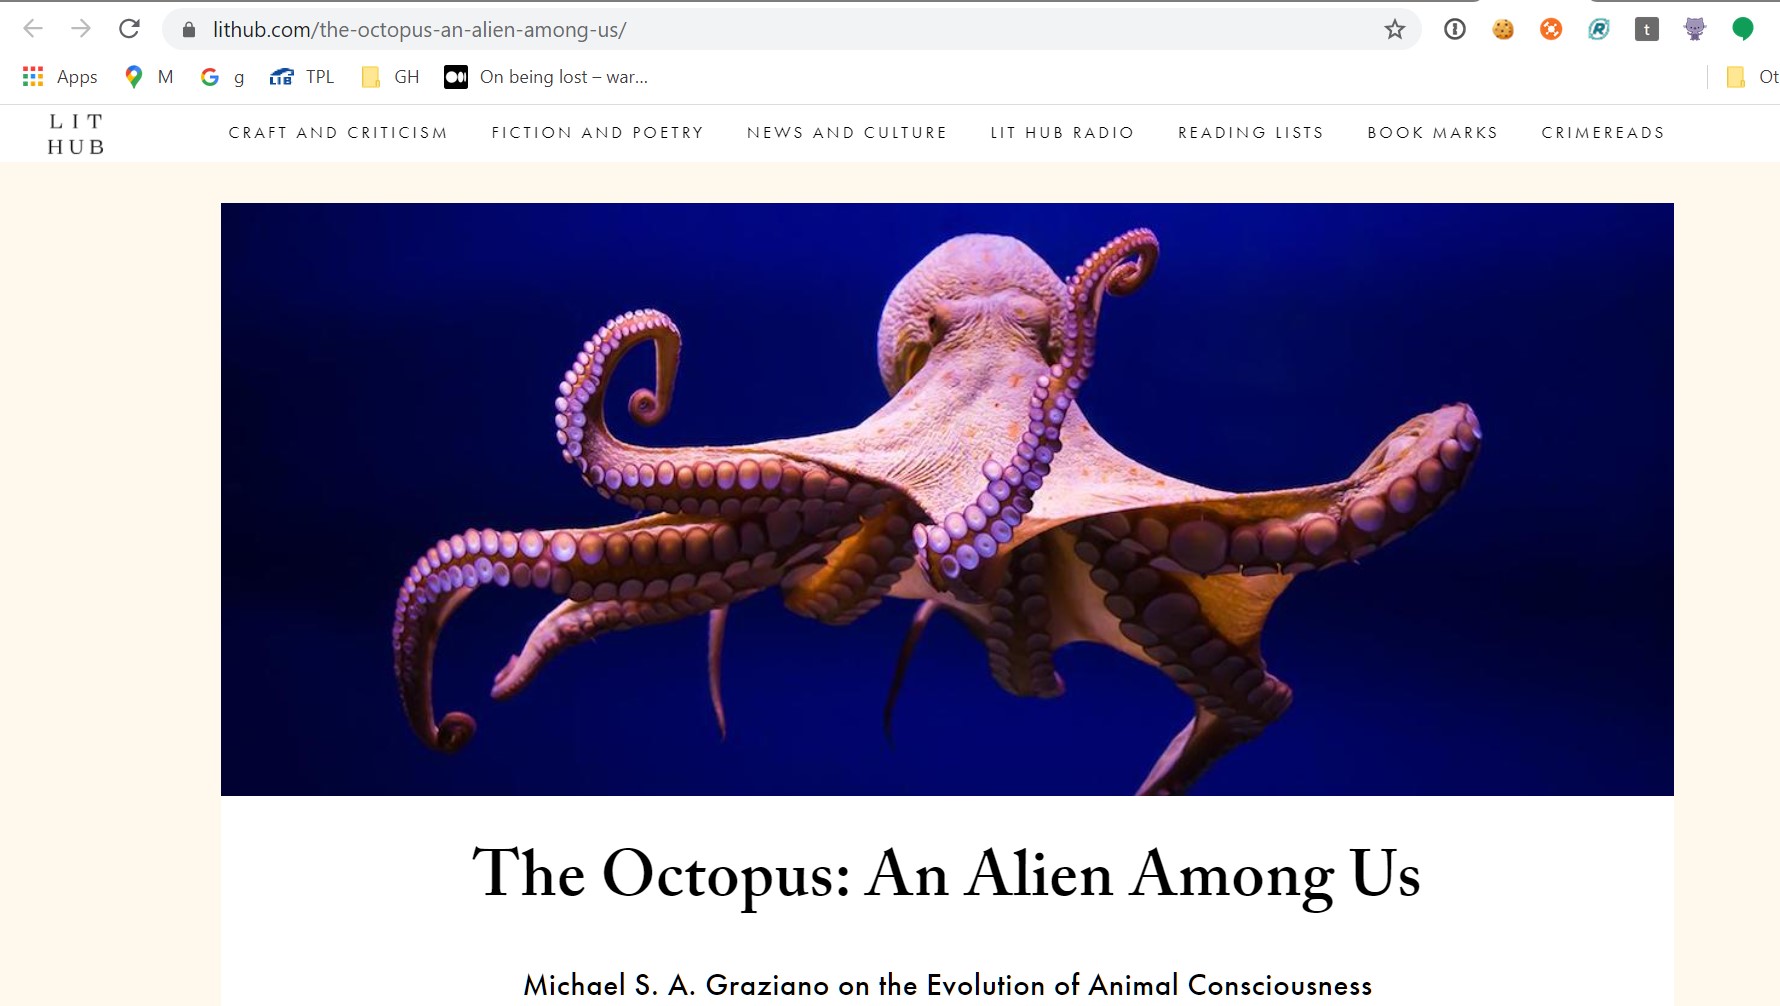 "Screen capture of LitHub.com 'the alien is among us'